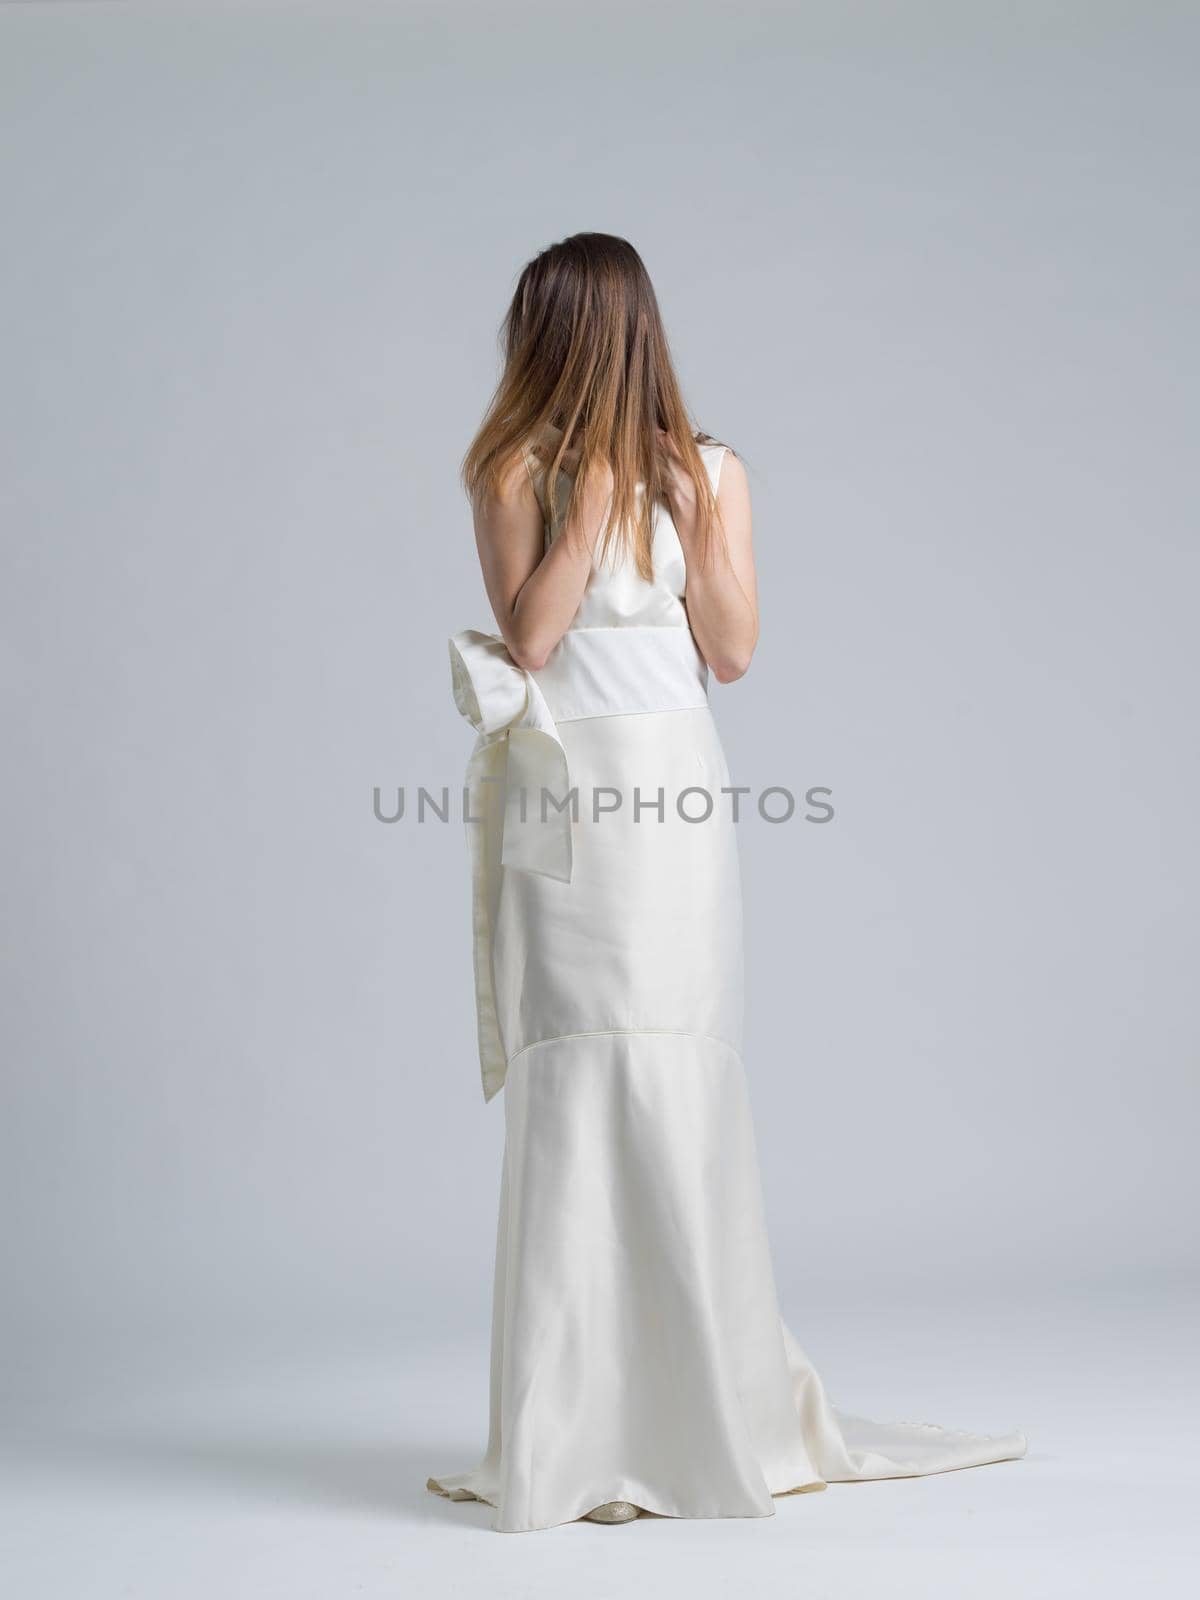 Rear view of a beautiful young bride in a wedding dress isolated on a white background